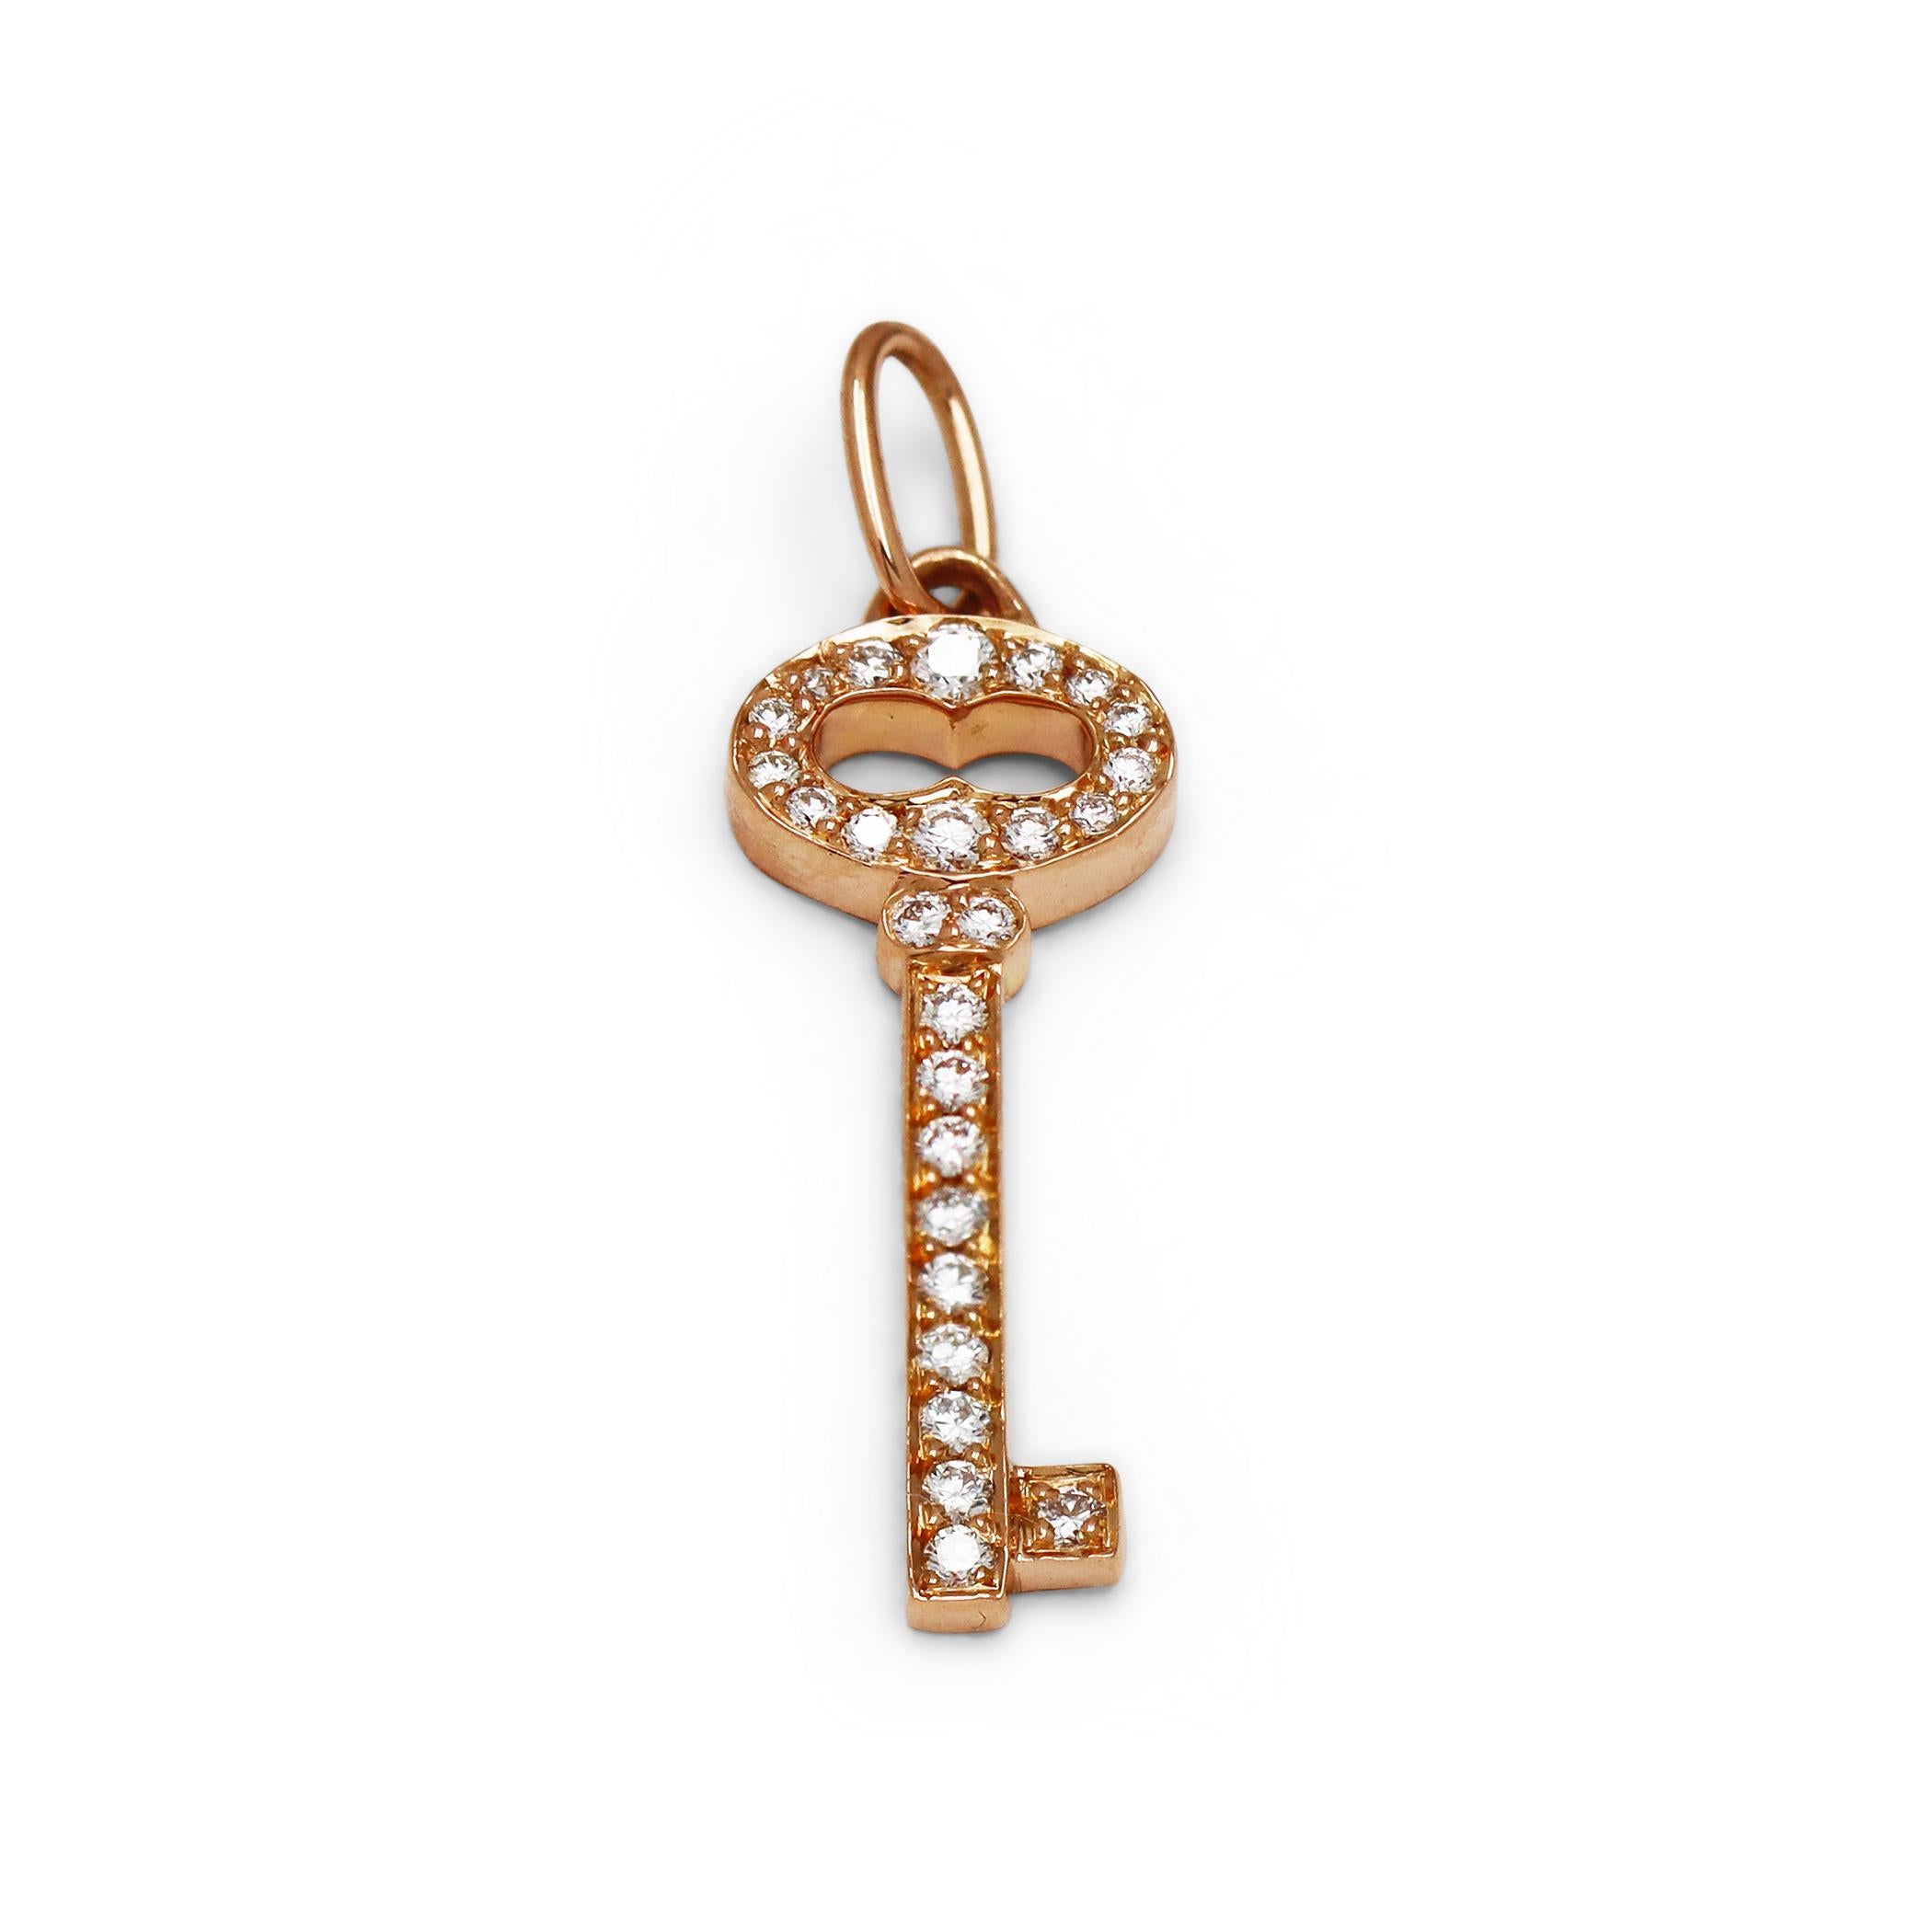 Authentic Tiffany & Co. 'Vintage Oval' key charm crafted in 18 karat rose gold and set with approximately 0.15 carats of round brilliant diamonds. The charm measures 1 inch in length and is accompanied by a black silk cord. Signed Tiffany & Co.,